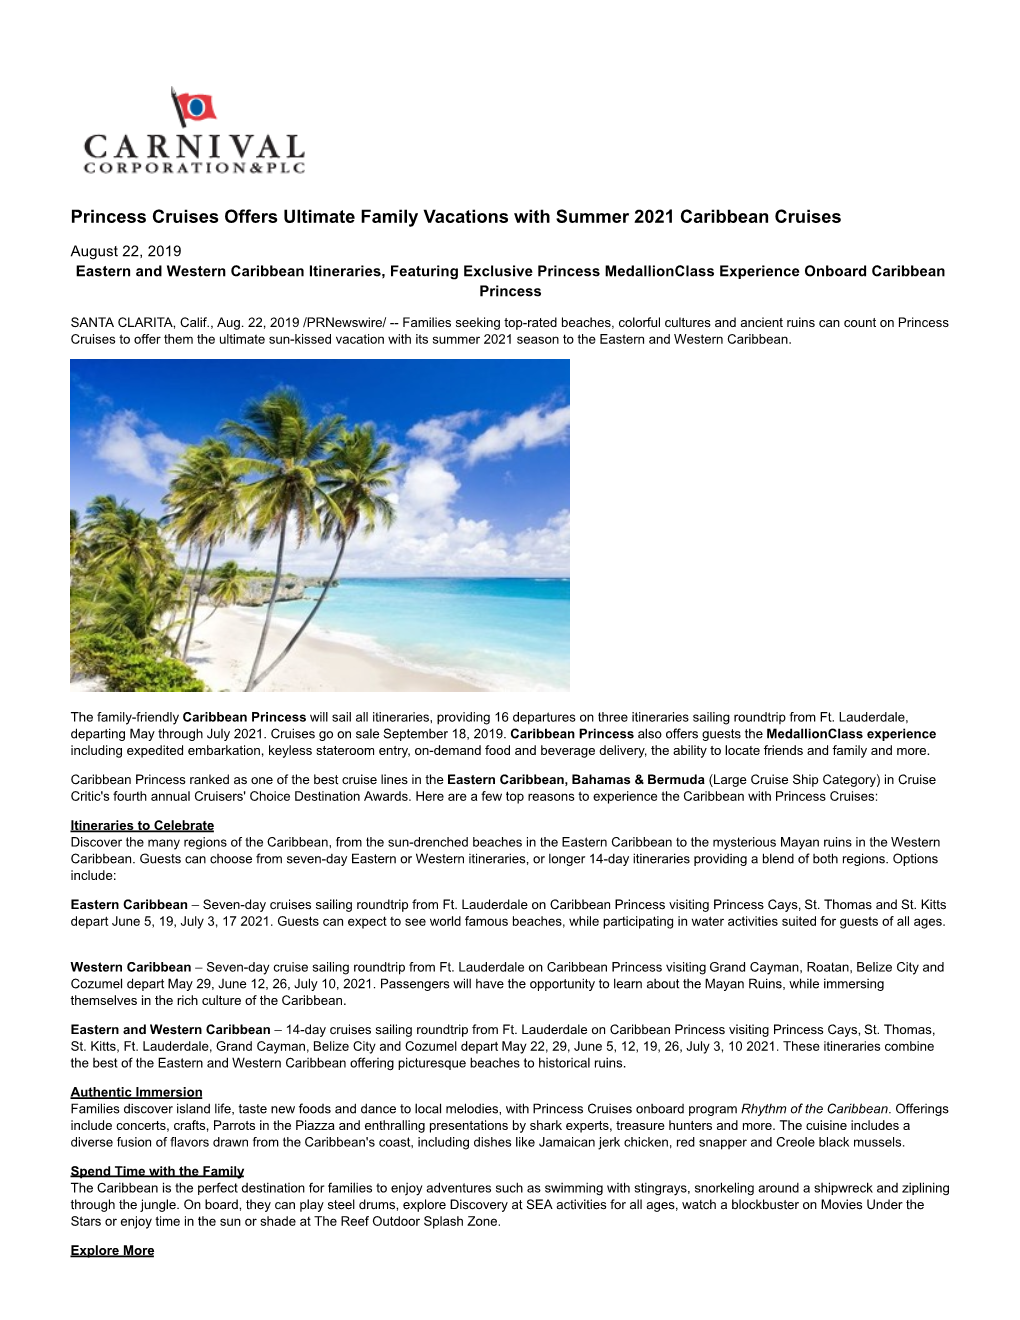 Princess Cruises Offers Ultimate Family Vacations with Summer 2021 Caribbean Cruises